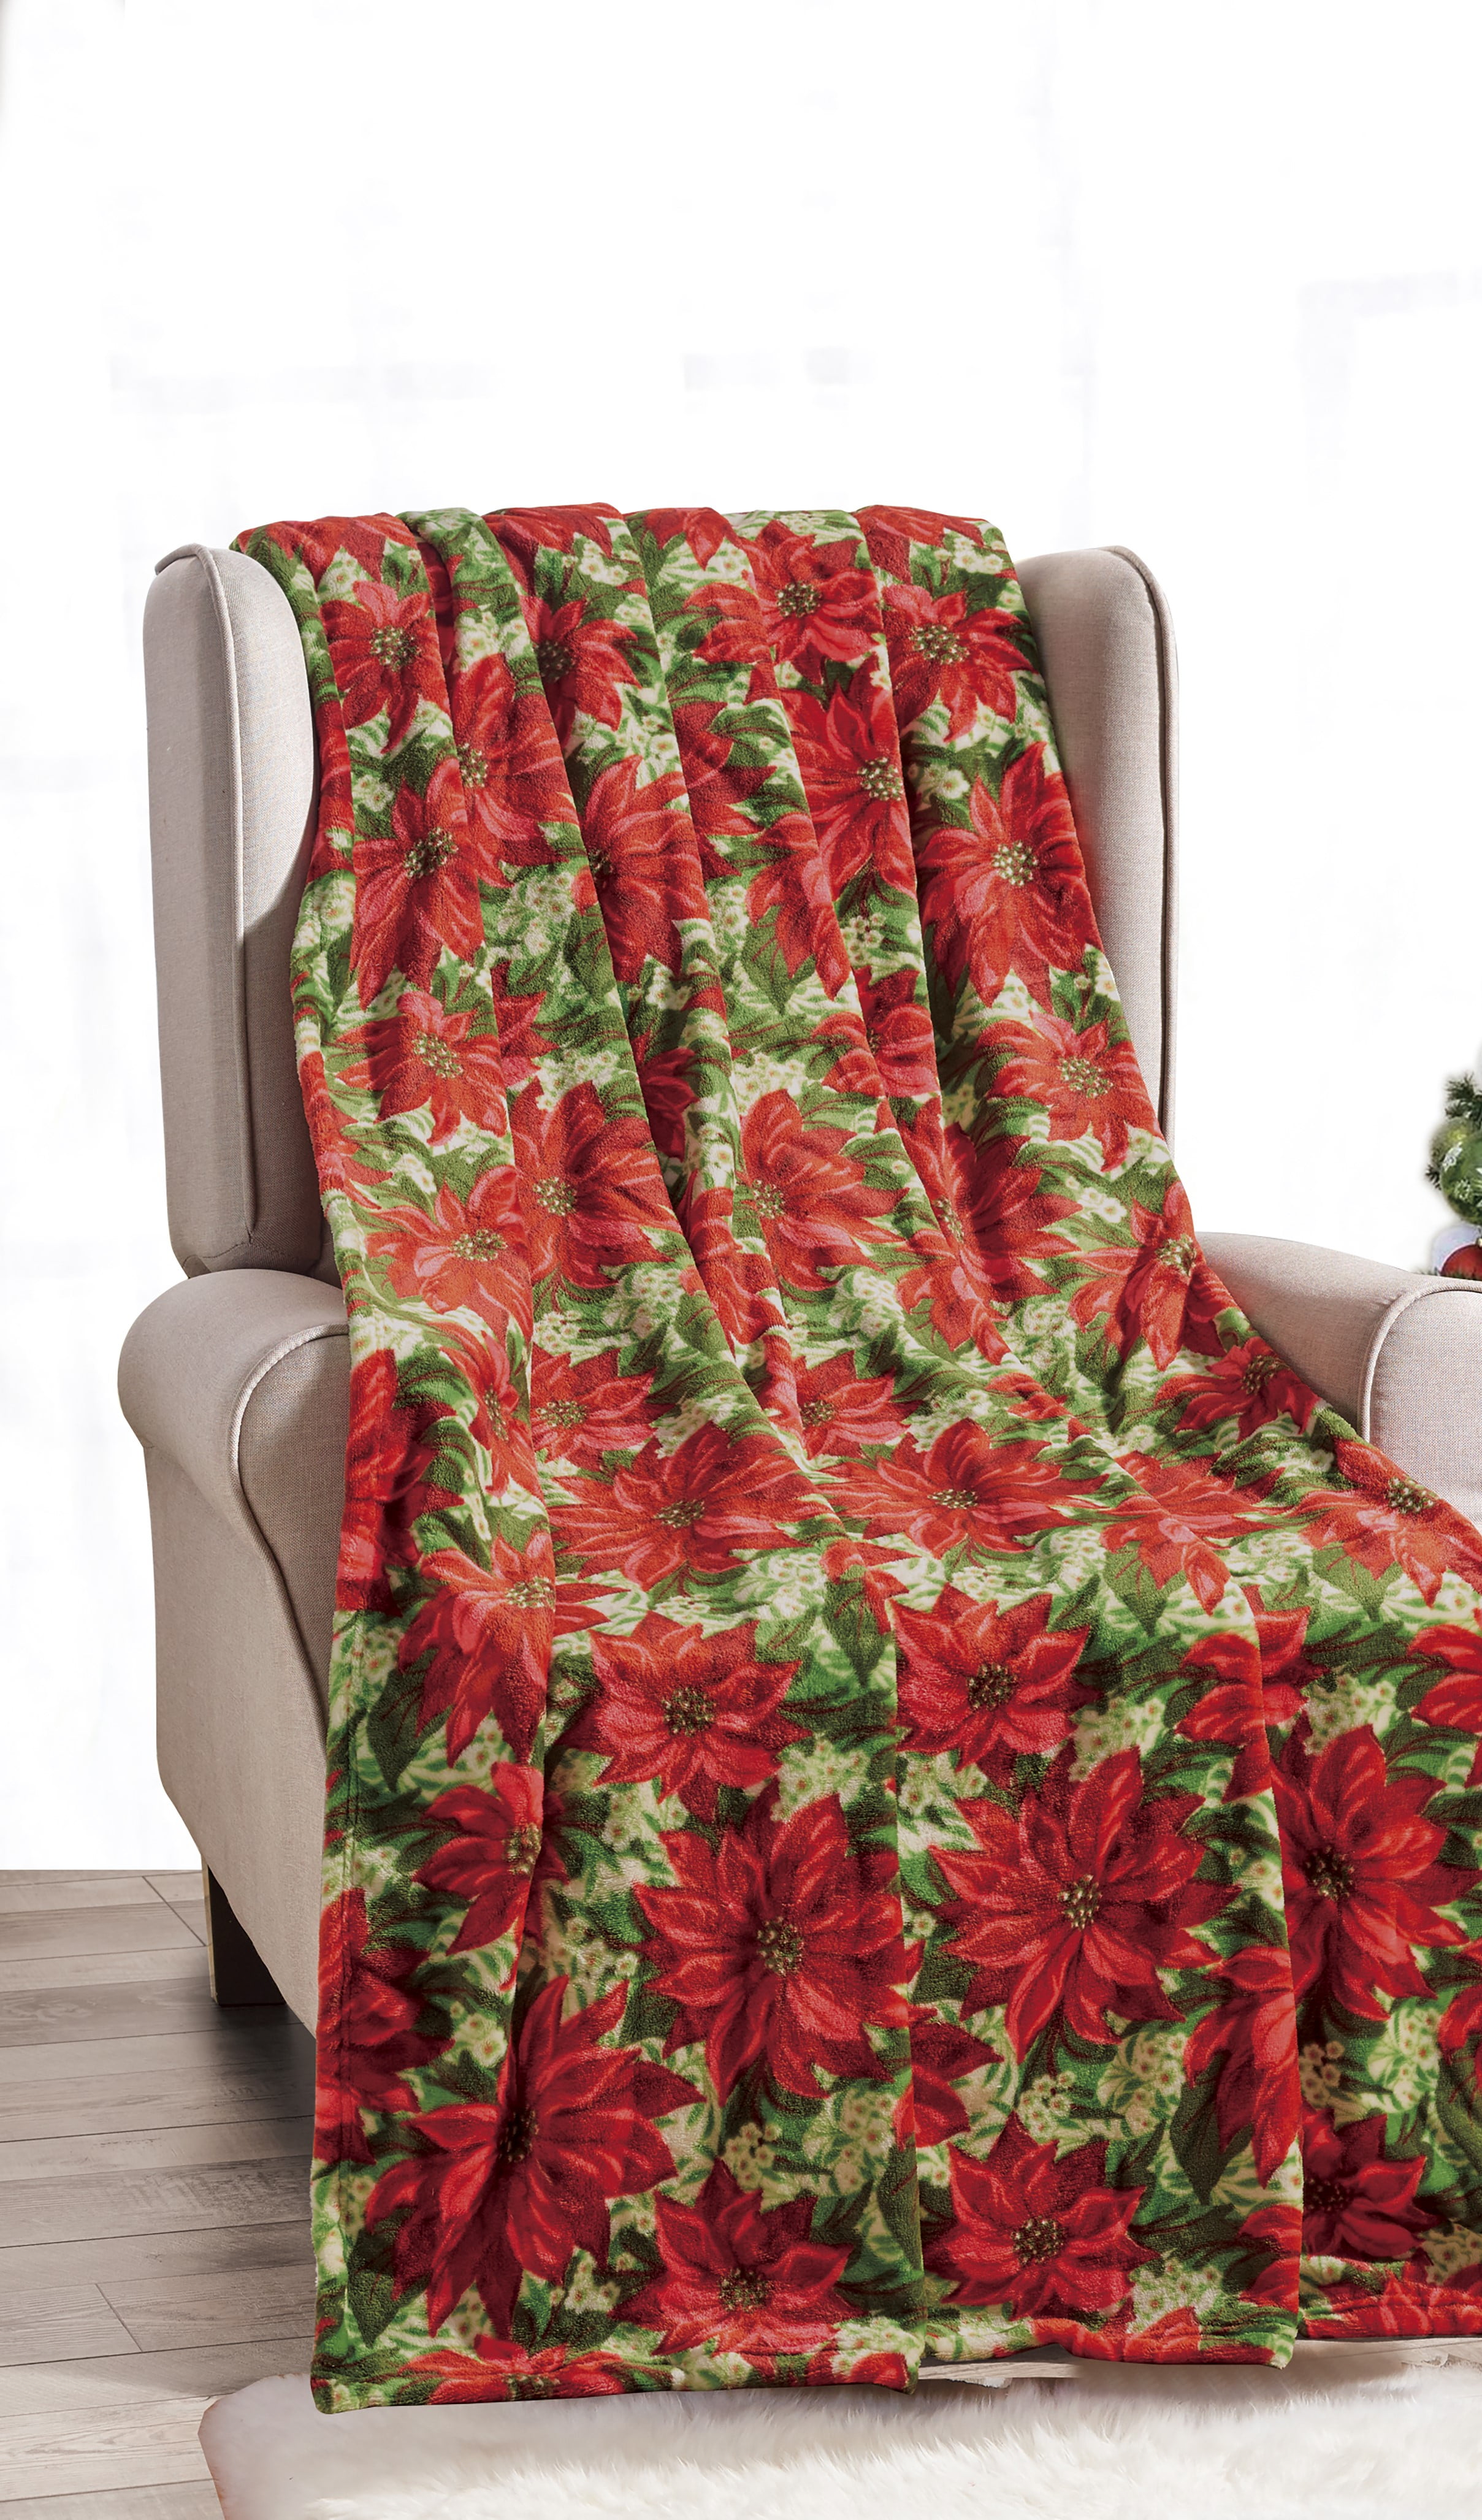 Details about   Plush Throw Blanket Holiday Poinsettia /Botanical Great Gift For Holidays 